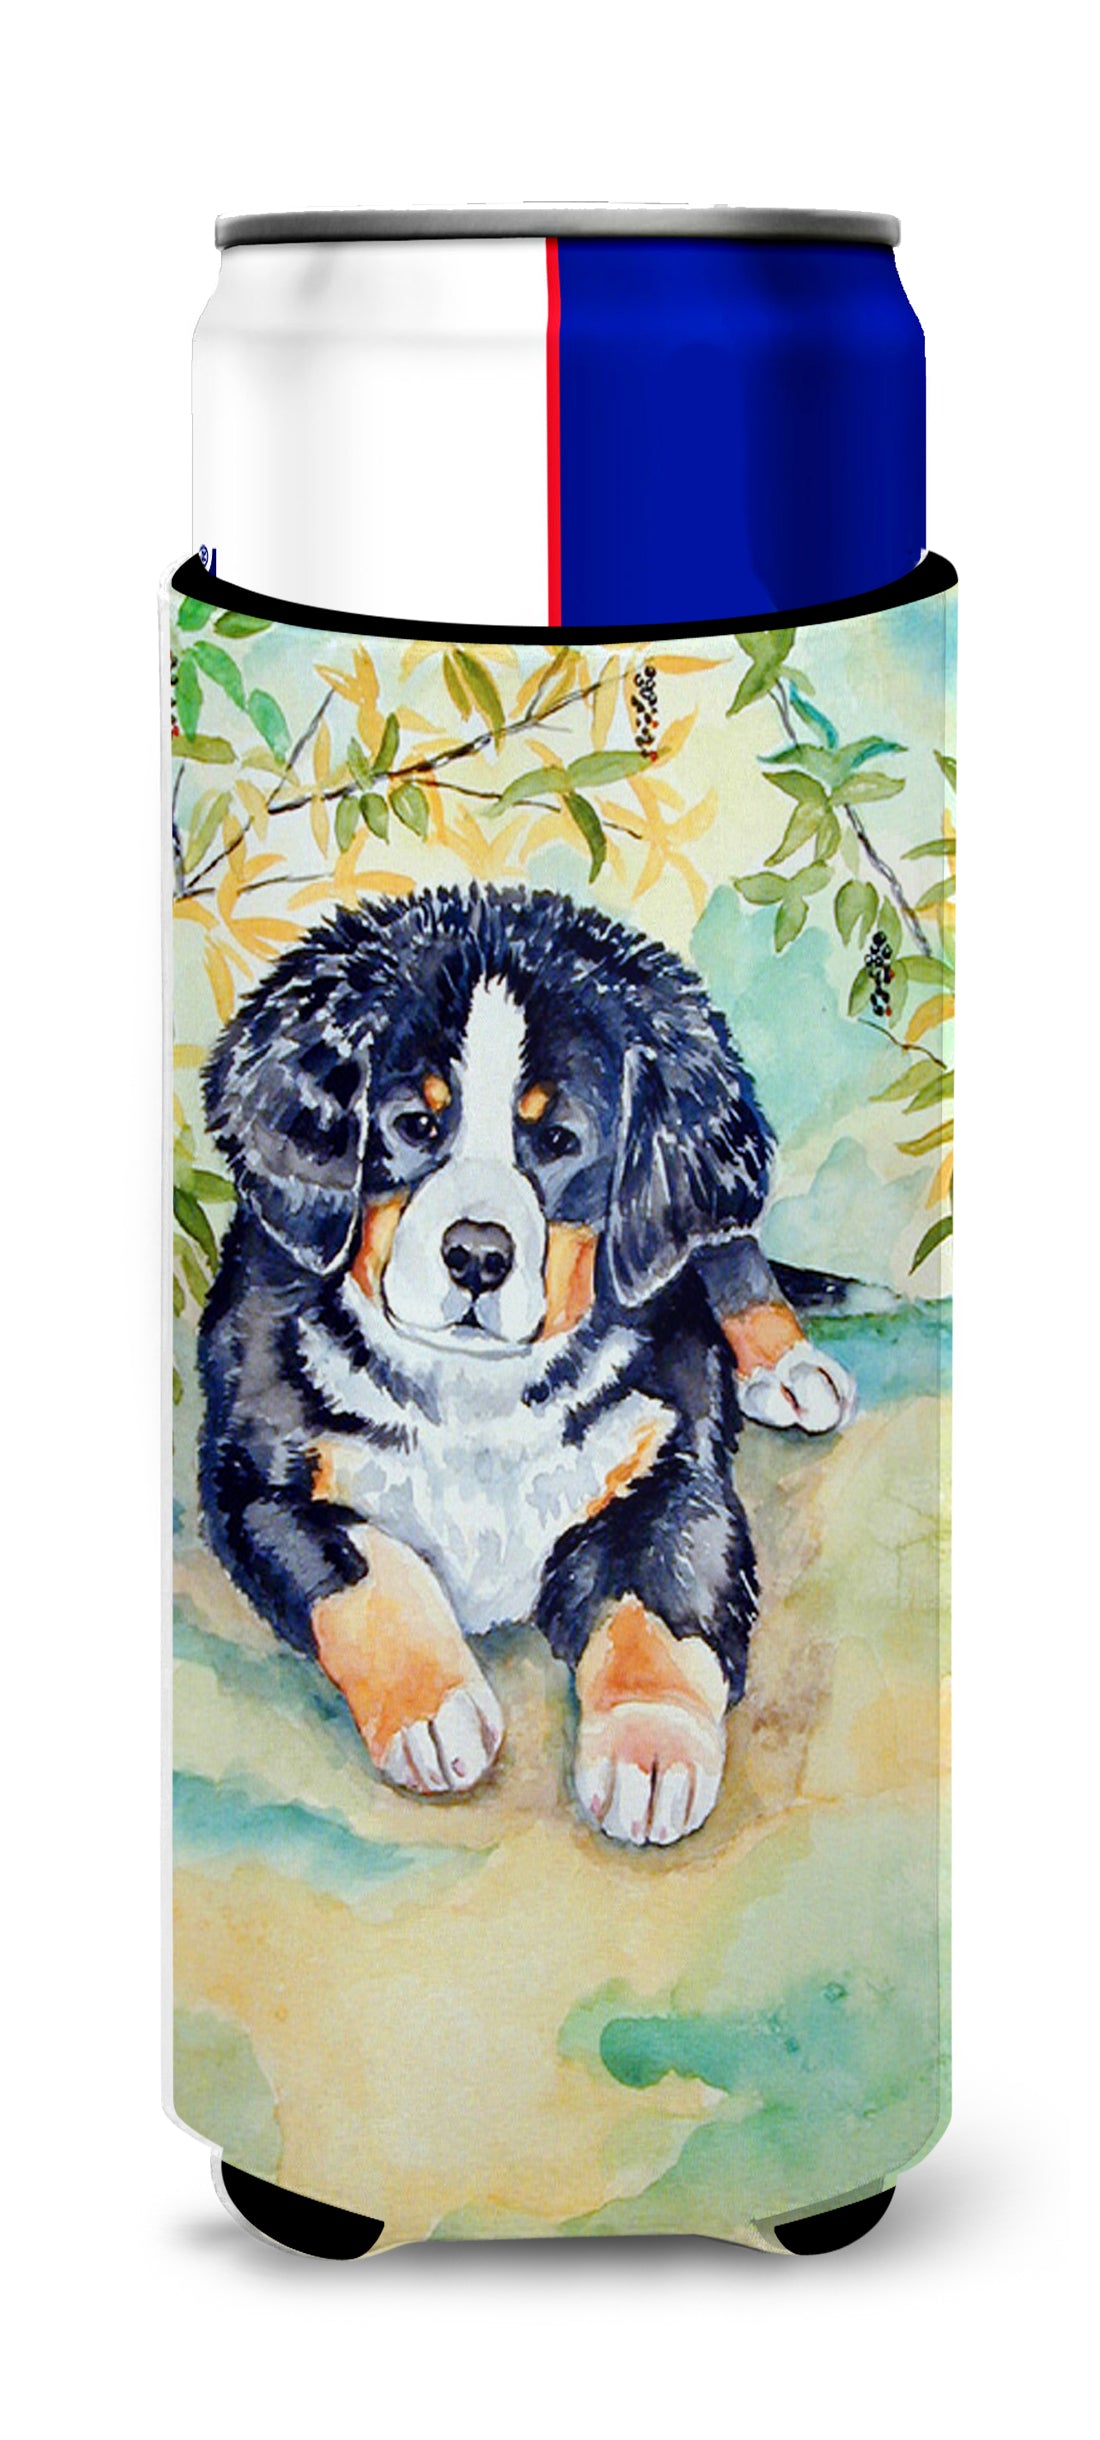 Bernese Mountain Dog Puppy Ultra Beverage Insulators for slim cans 7010MUK